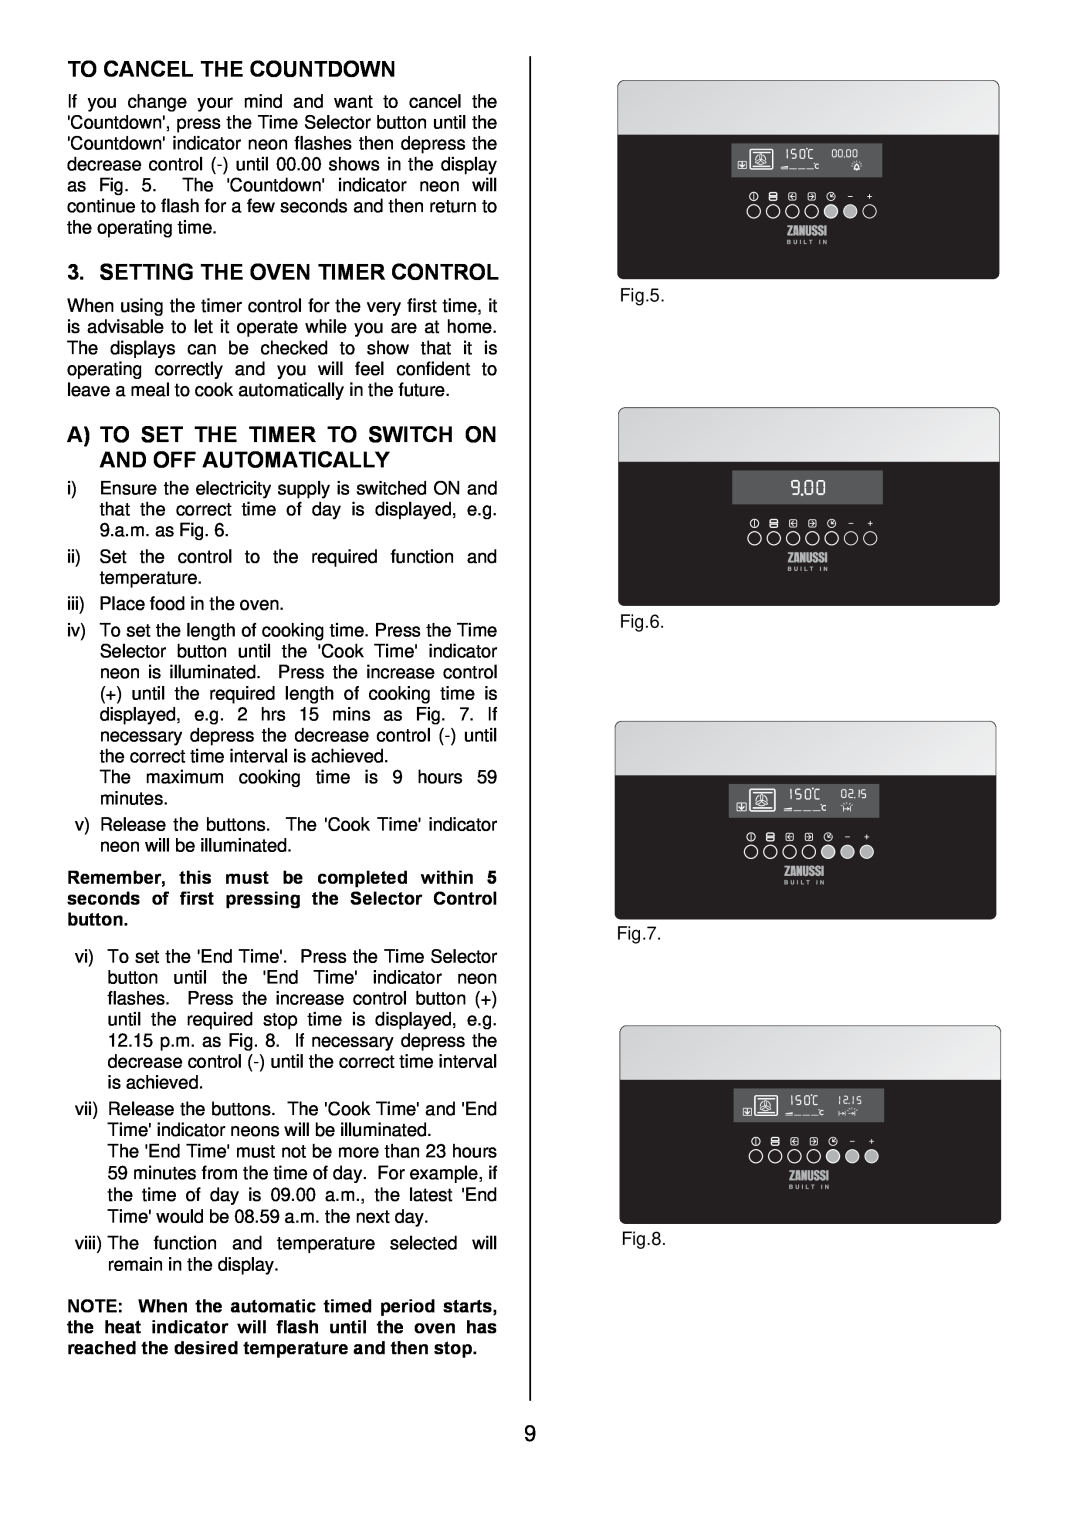 Zanussi ZDQ 995 manual To Cancel The Countdown, Setting The Oven Timer Control 